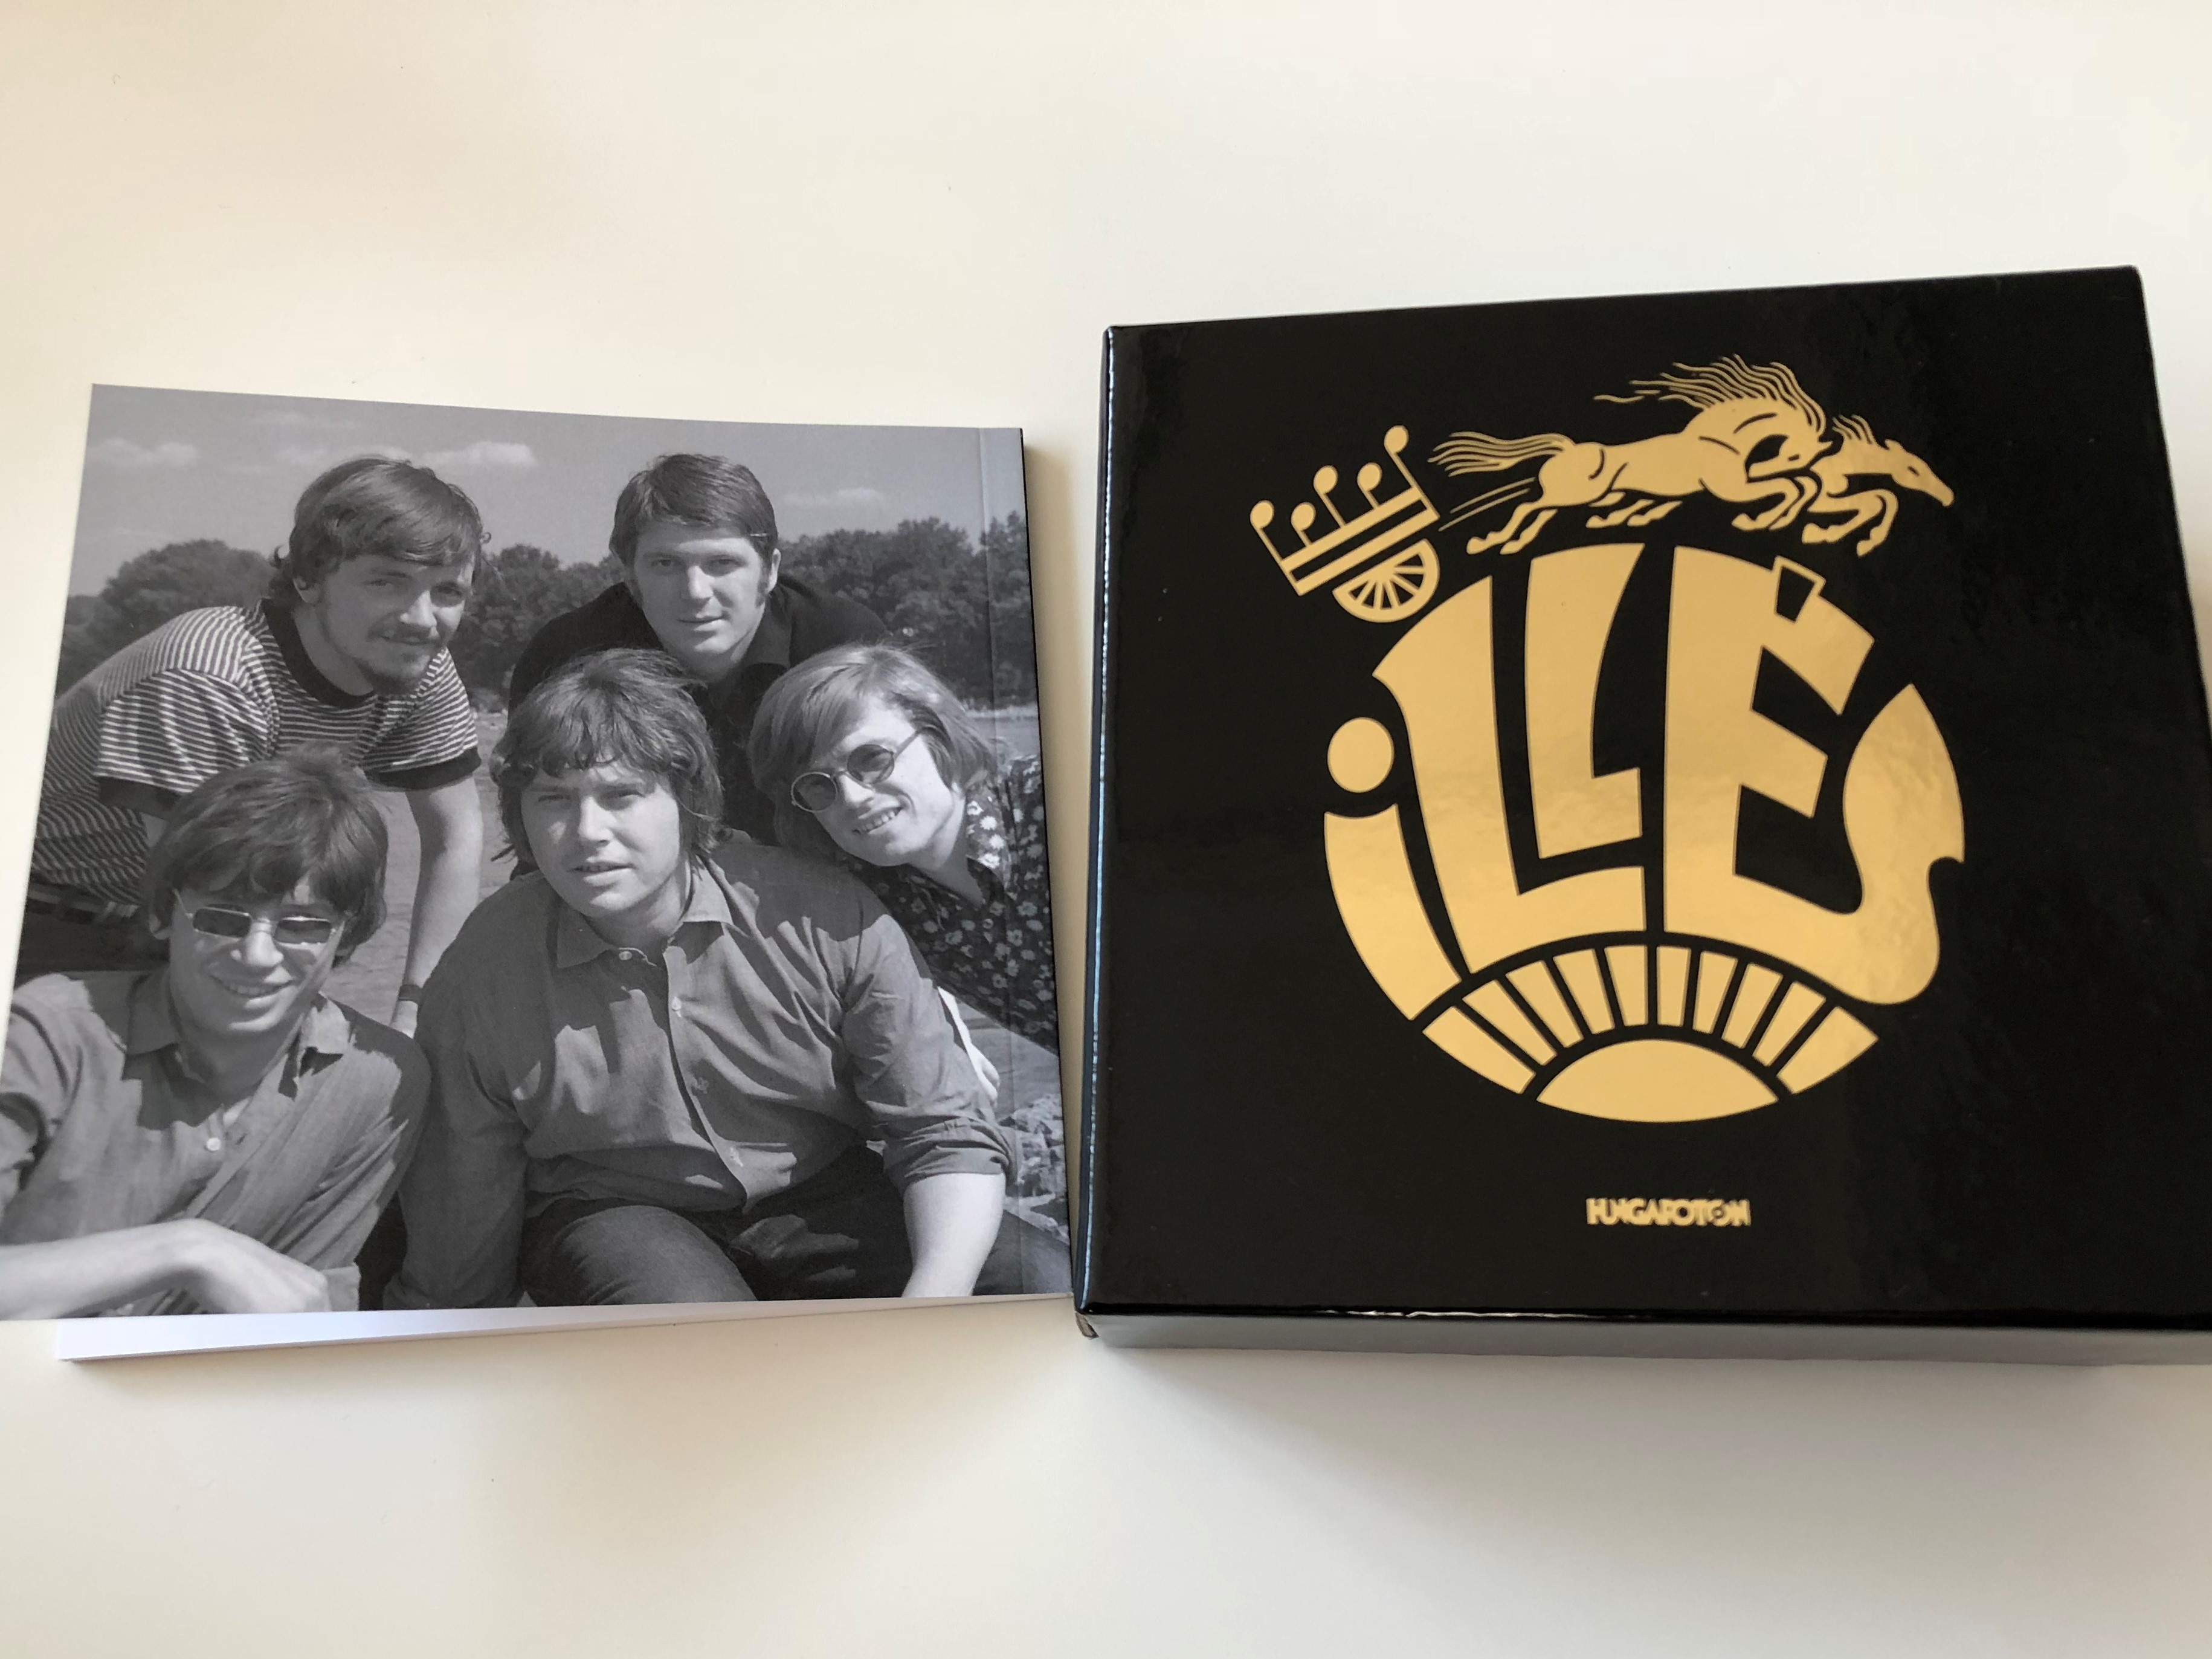 ill-s-egy-ttes-50th-anniversary-collector-s-5cd-set-24-.jpg